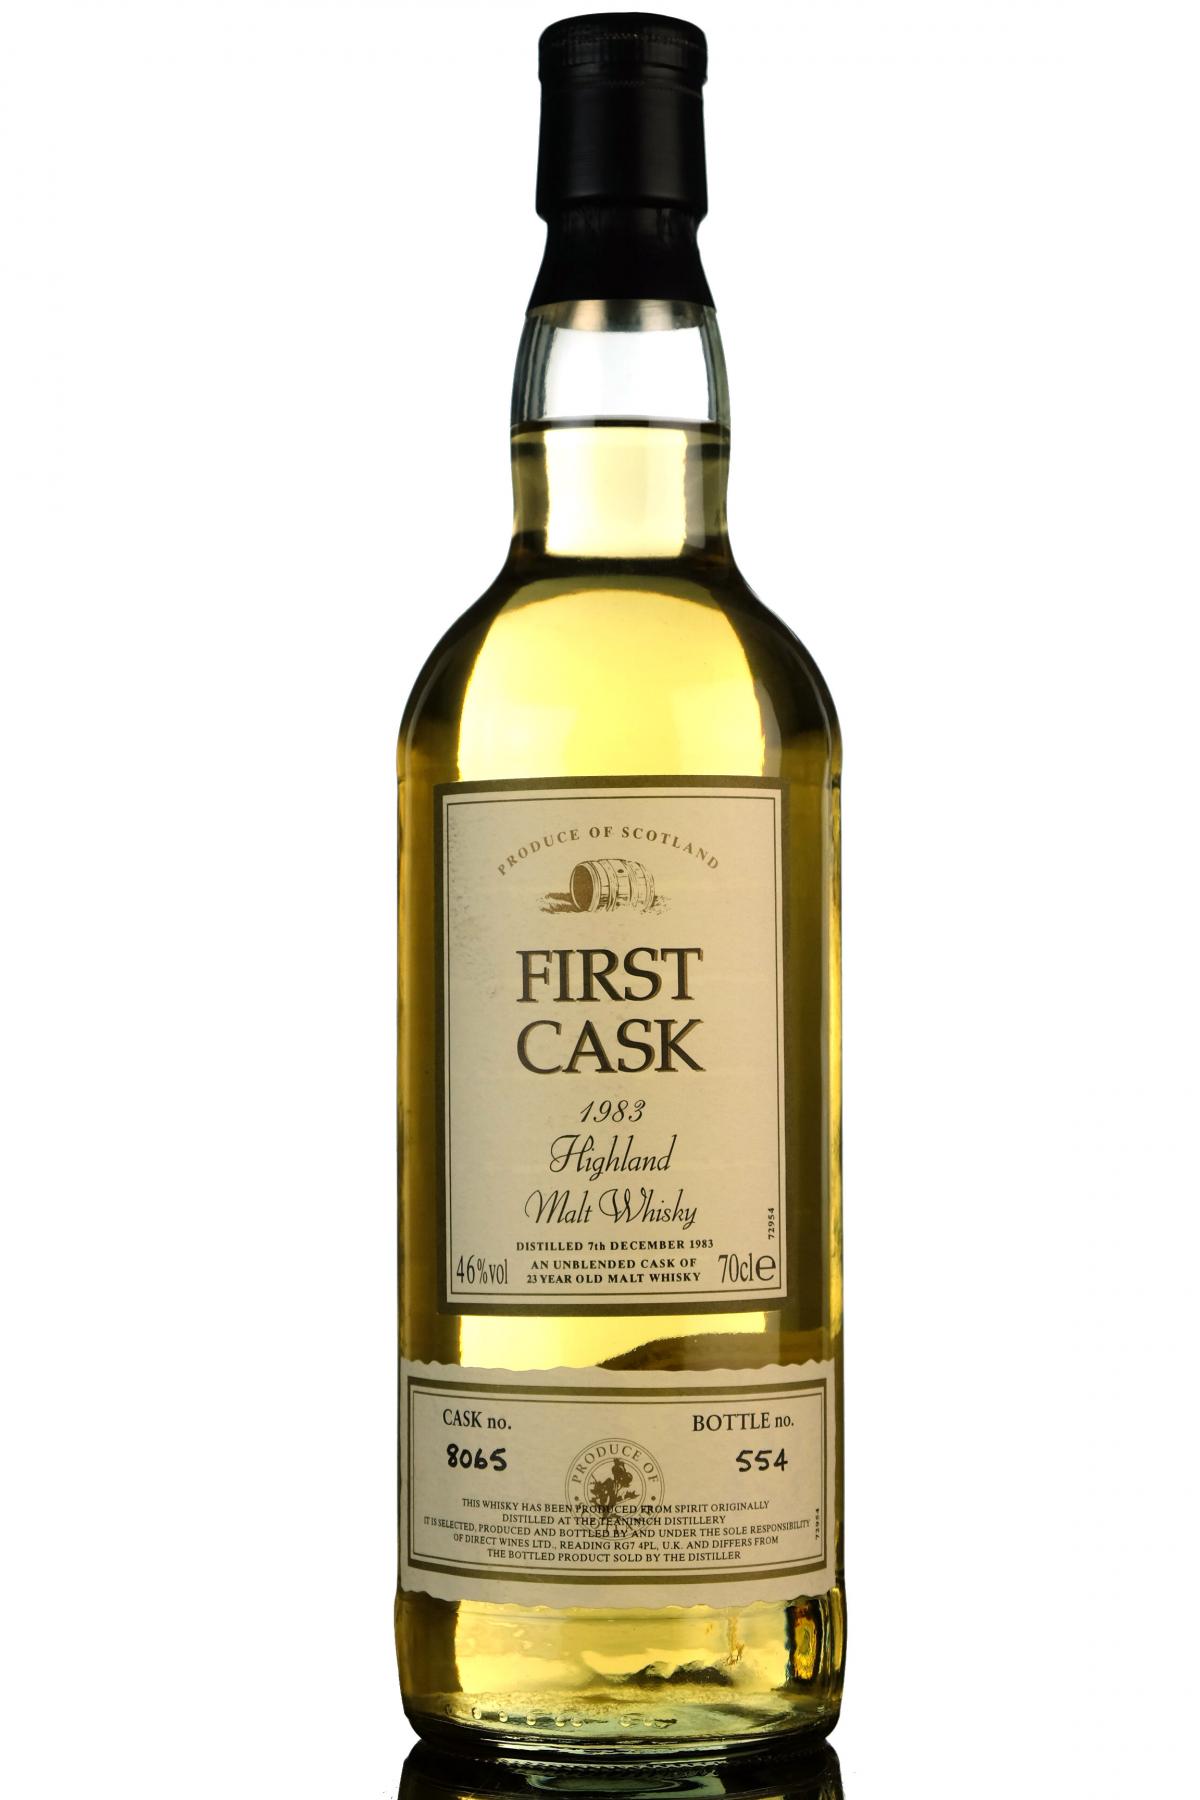 Teaninich 1983 - 23 Year Old - First Cask 8065